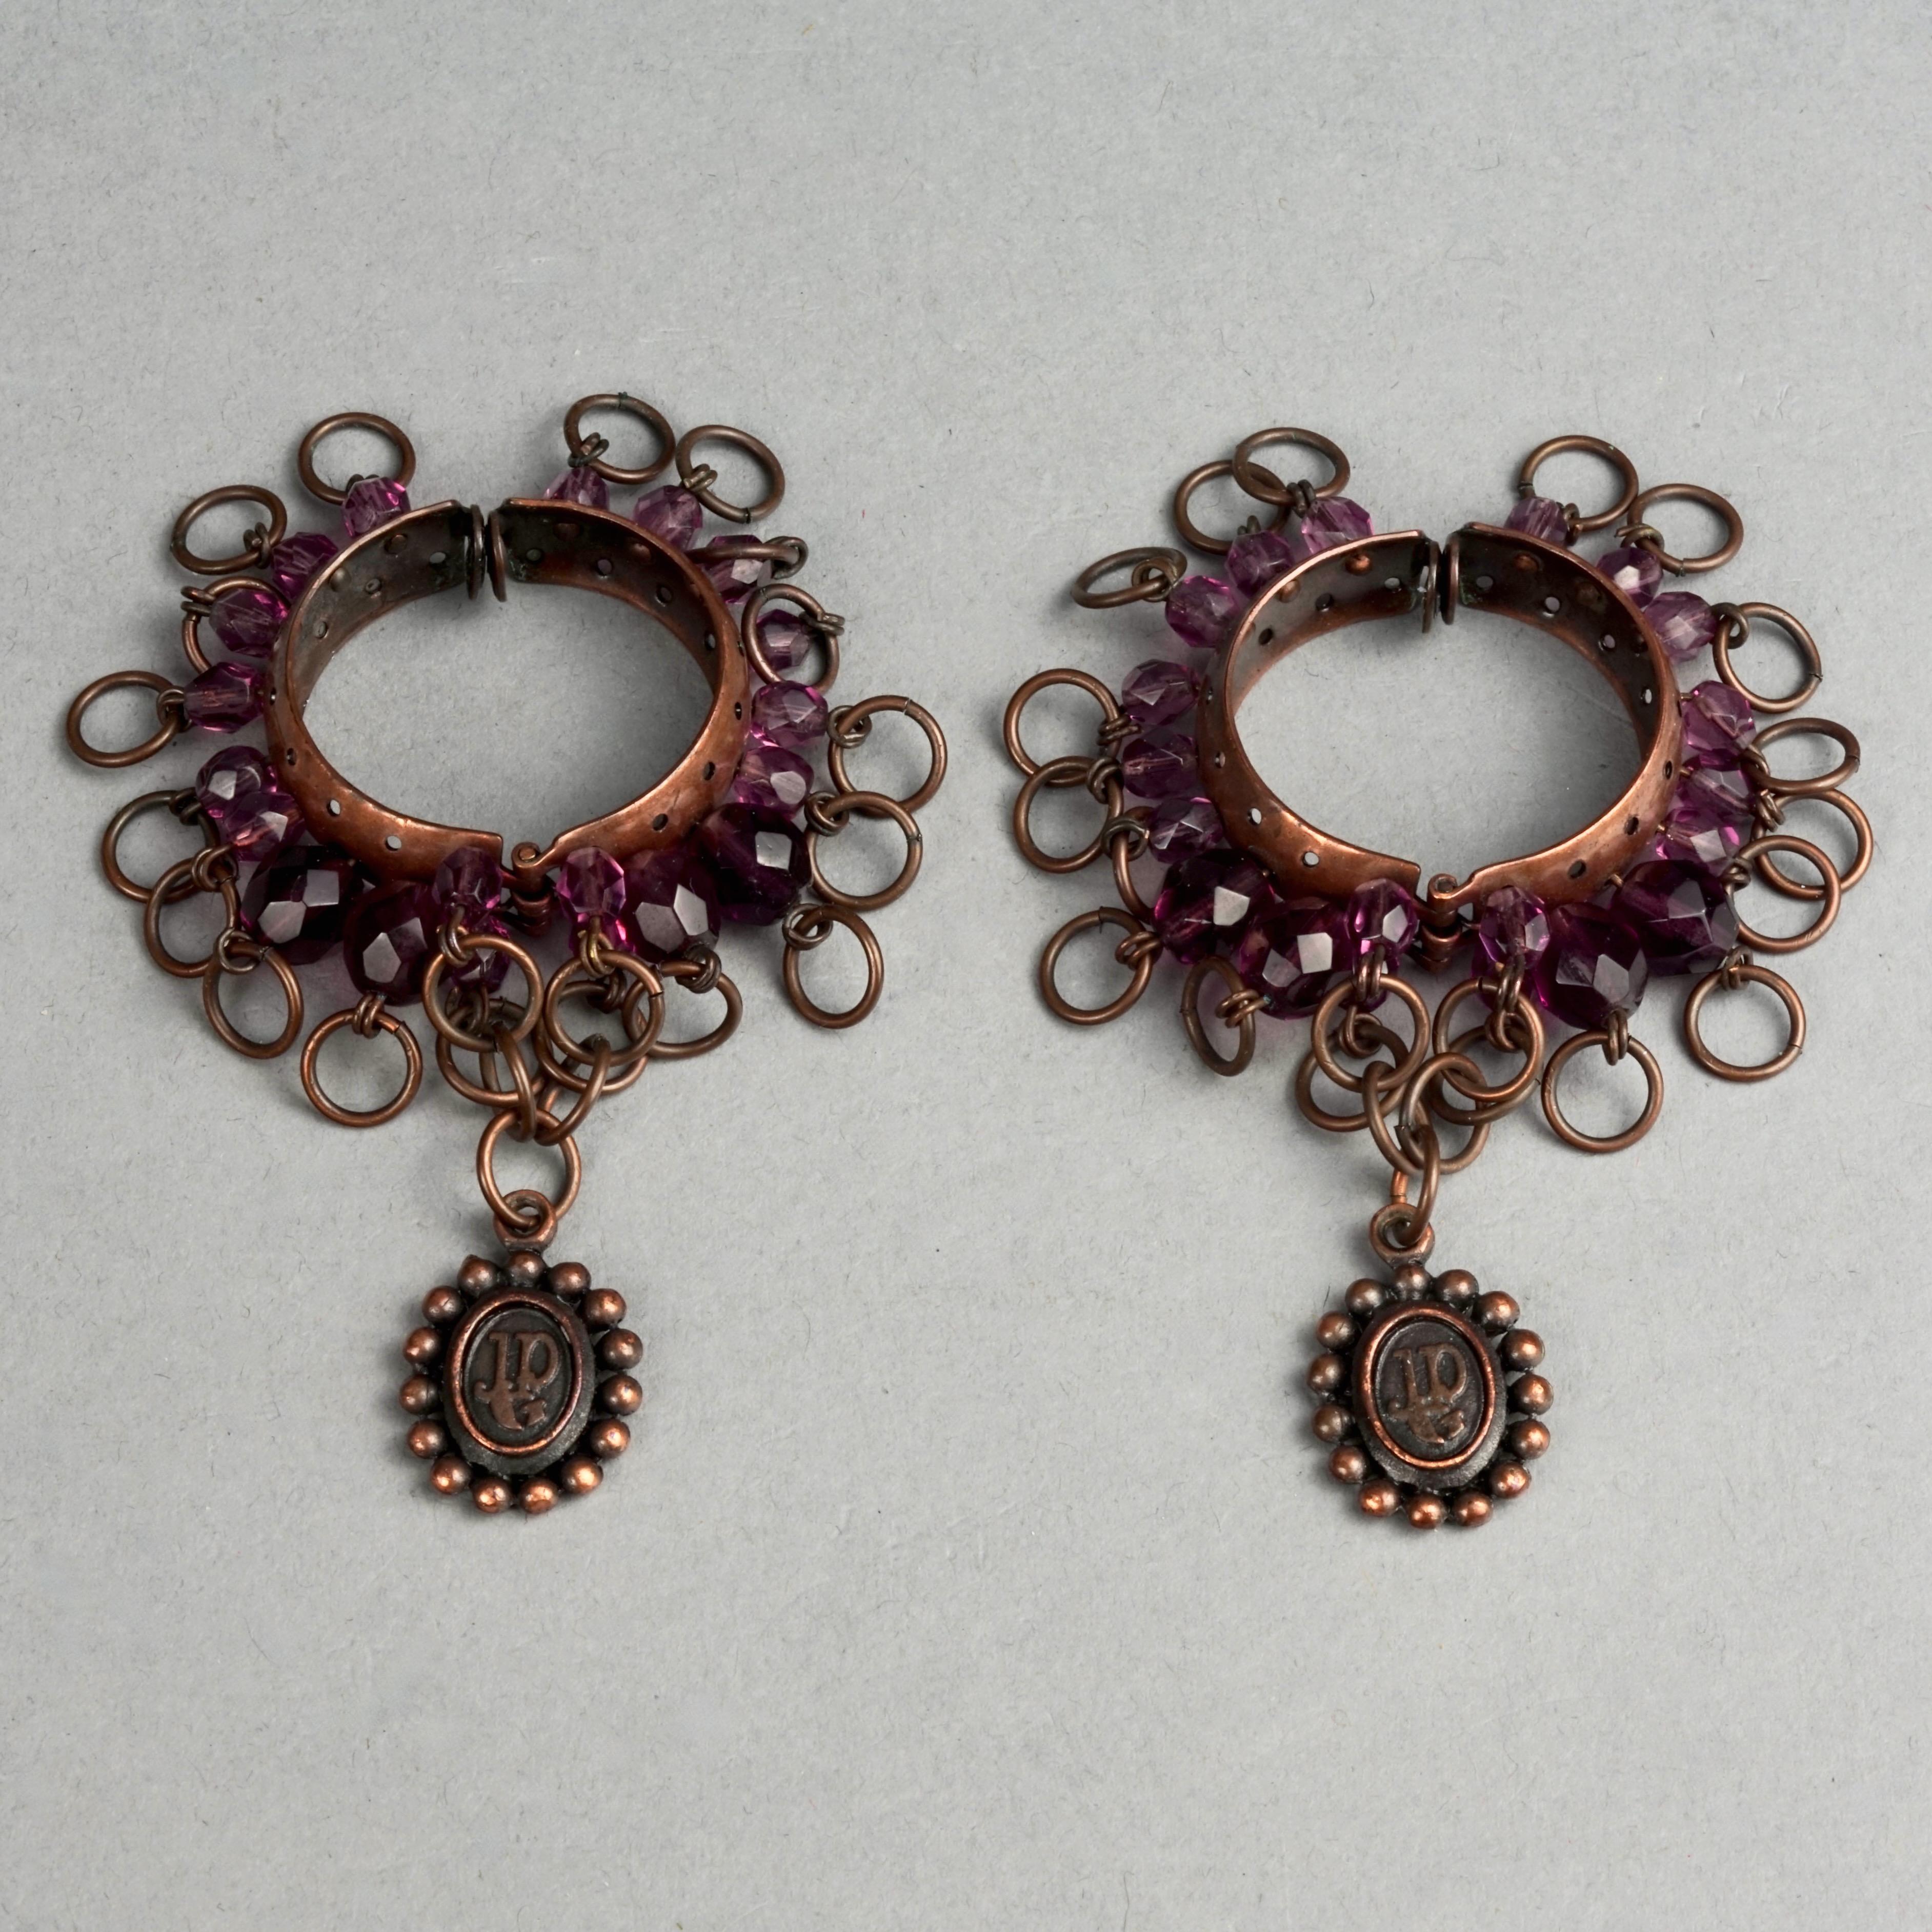 Vintage JEAN PAUL GAULTIER Tribal Creole Beaded Earrings In Excellent Condition For Sale In Kingersheim, Alsace